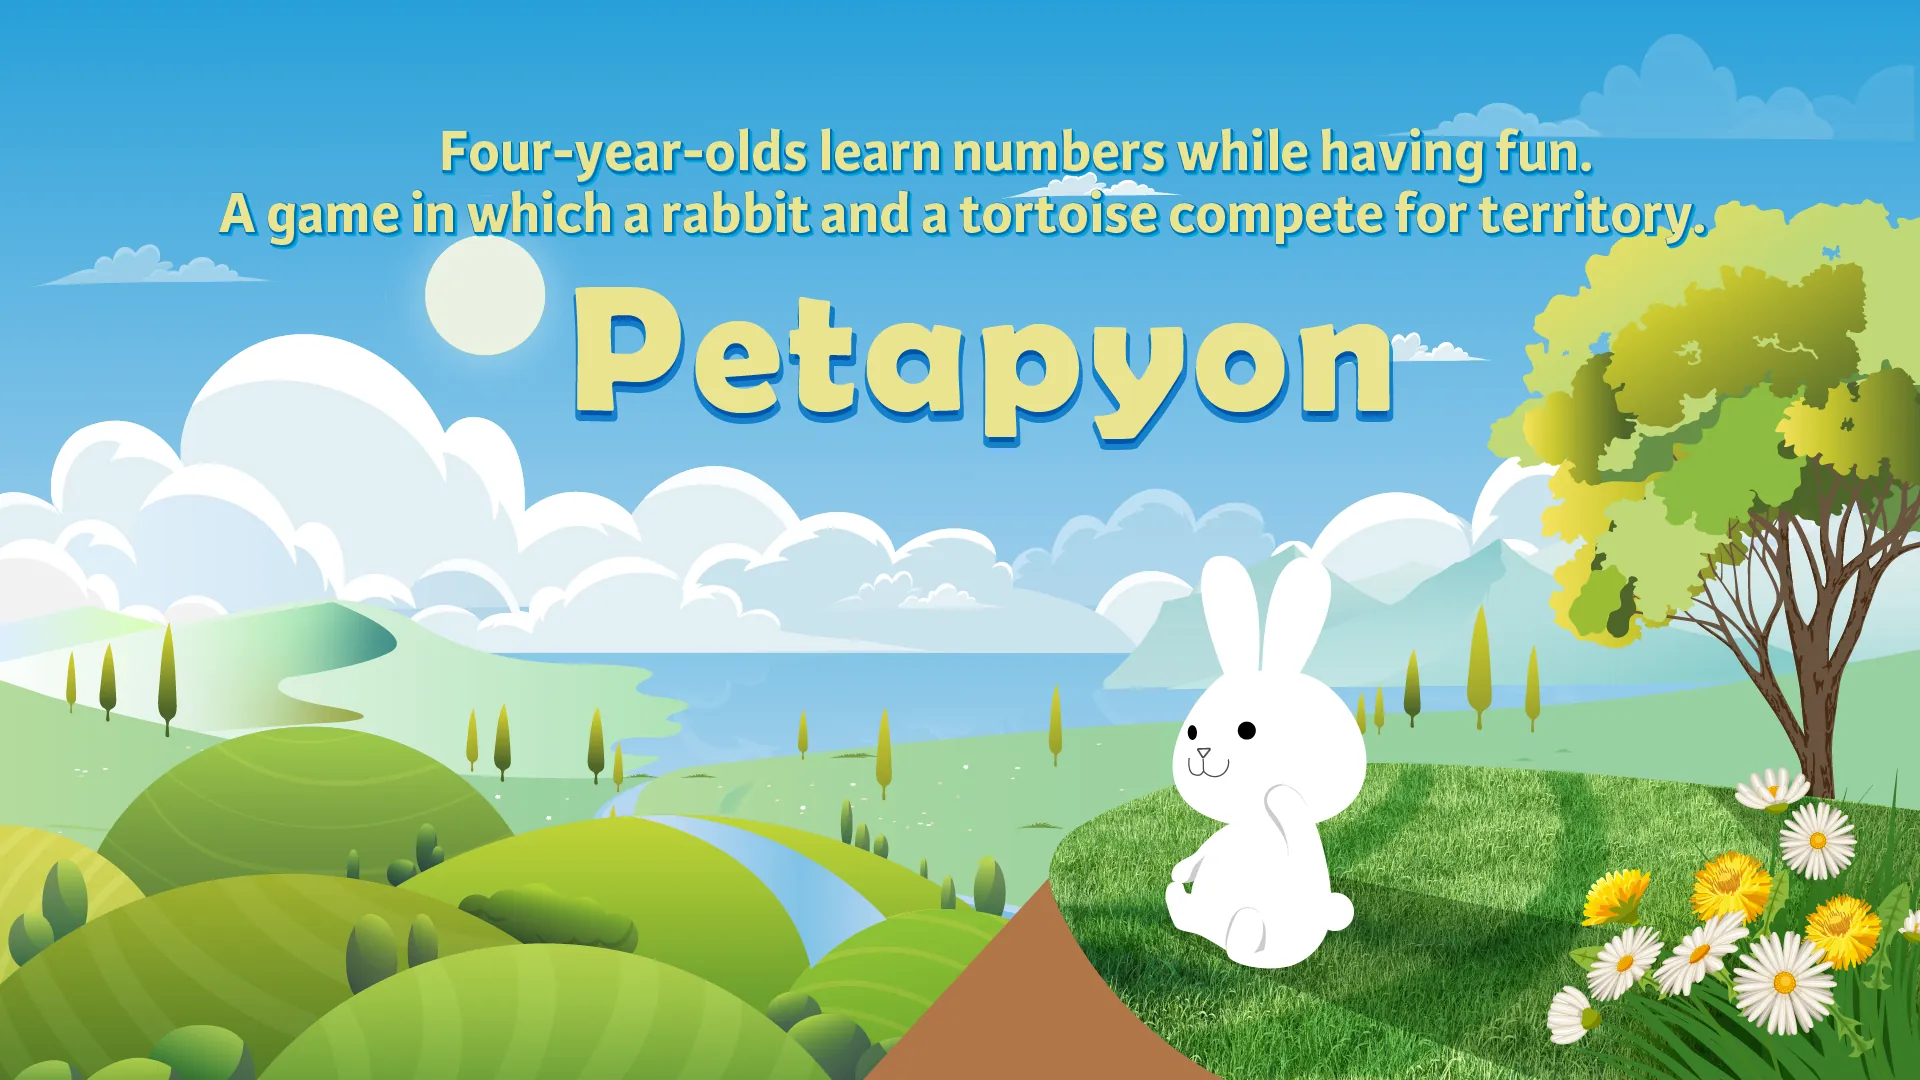 Four-year-olds learn numbers while having fun.A game in which a rabbit and a tortoise compete for territory.Petapion